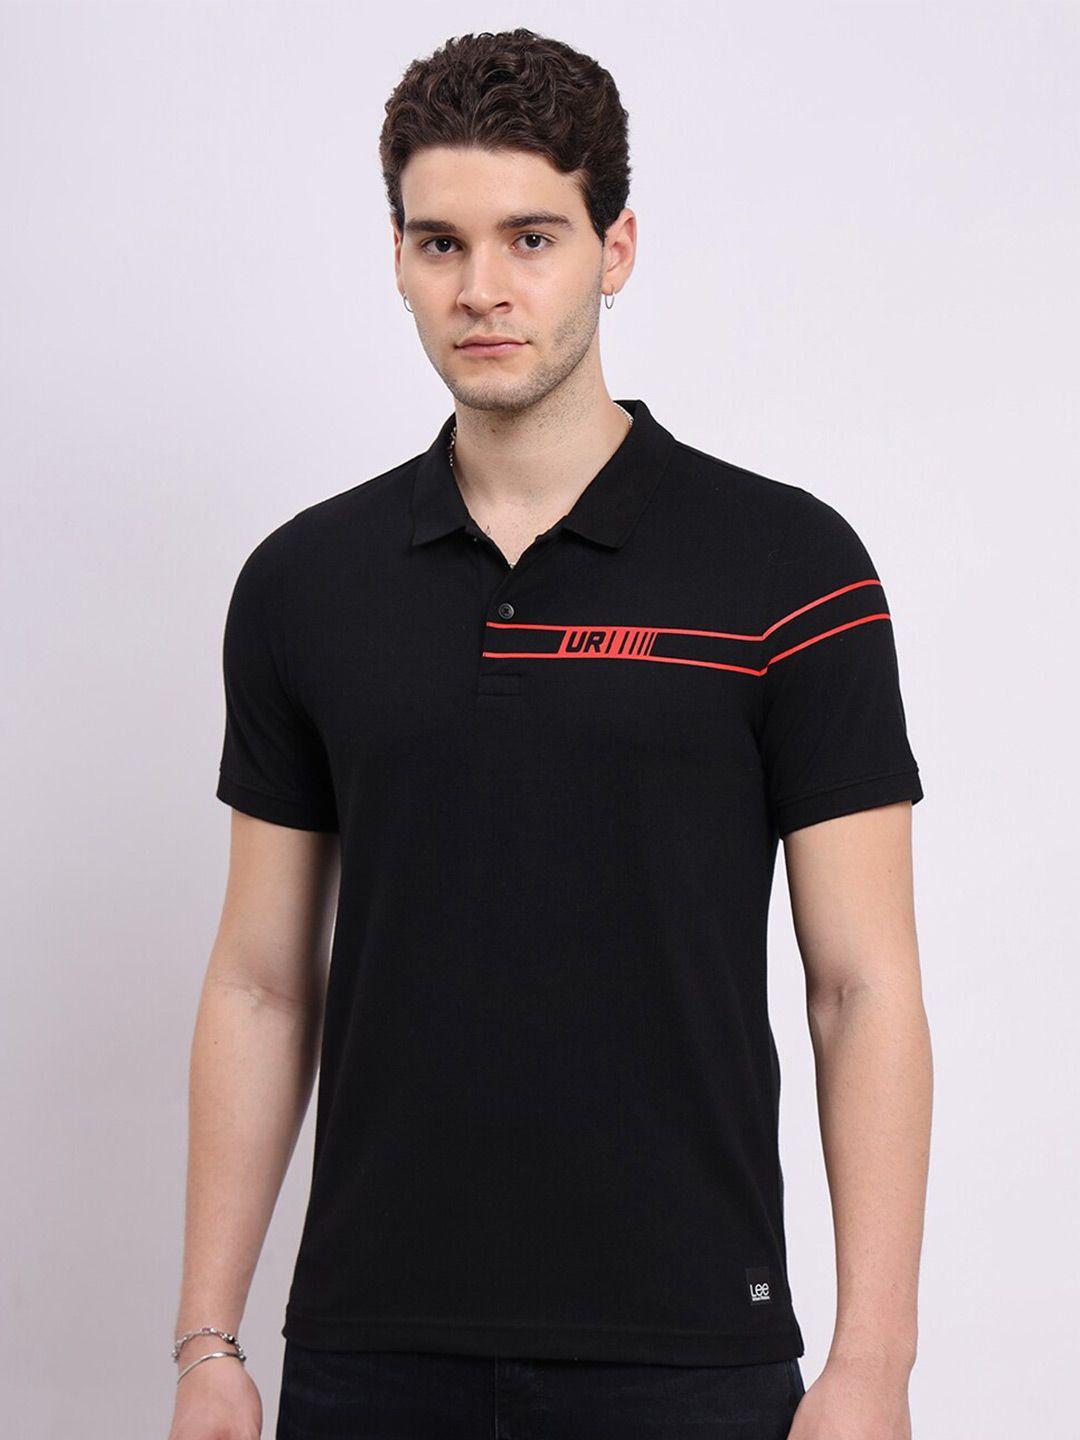 lee polo collar slim fit cotton t-shirt